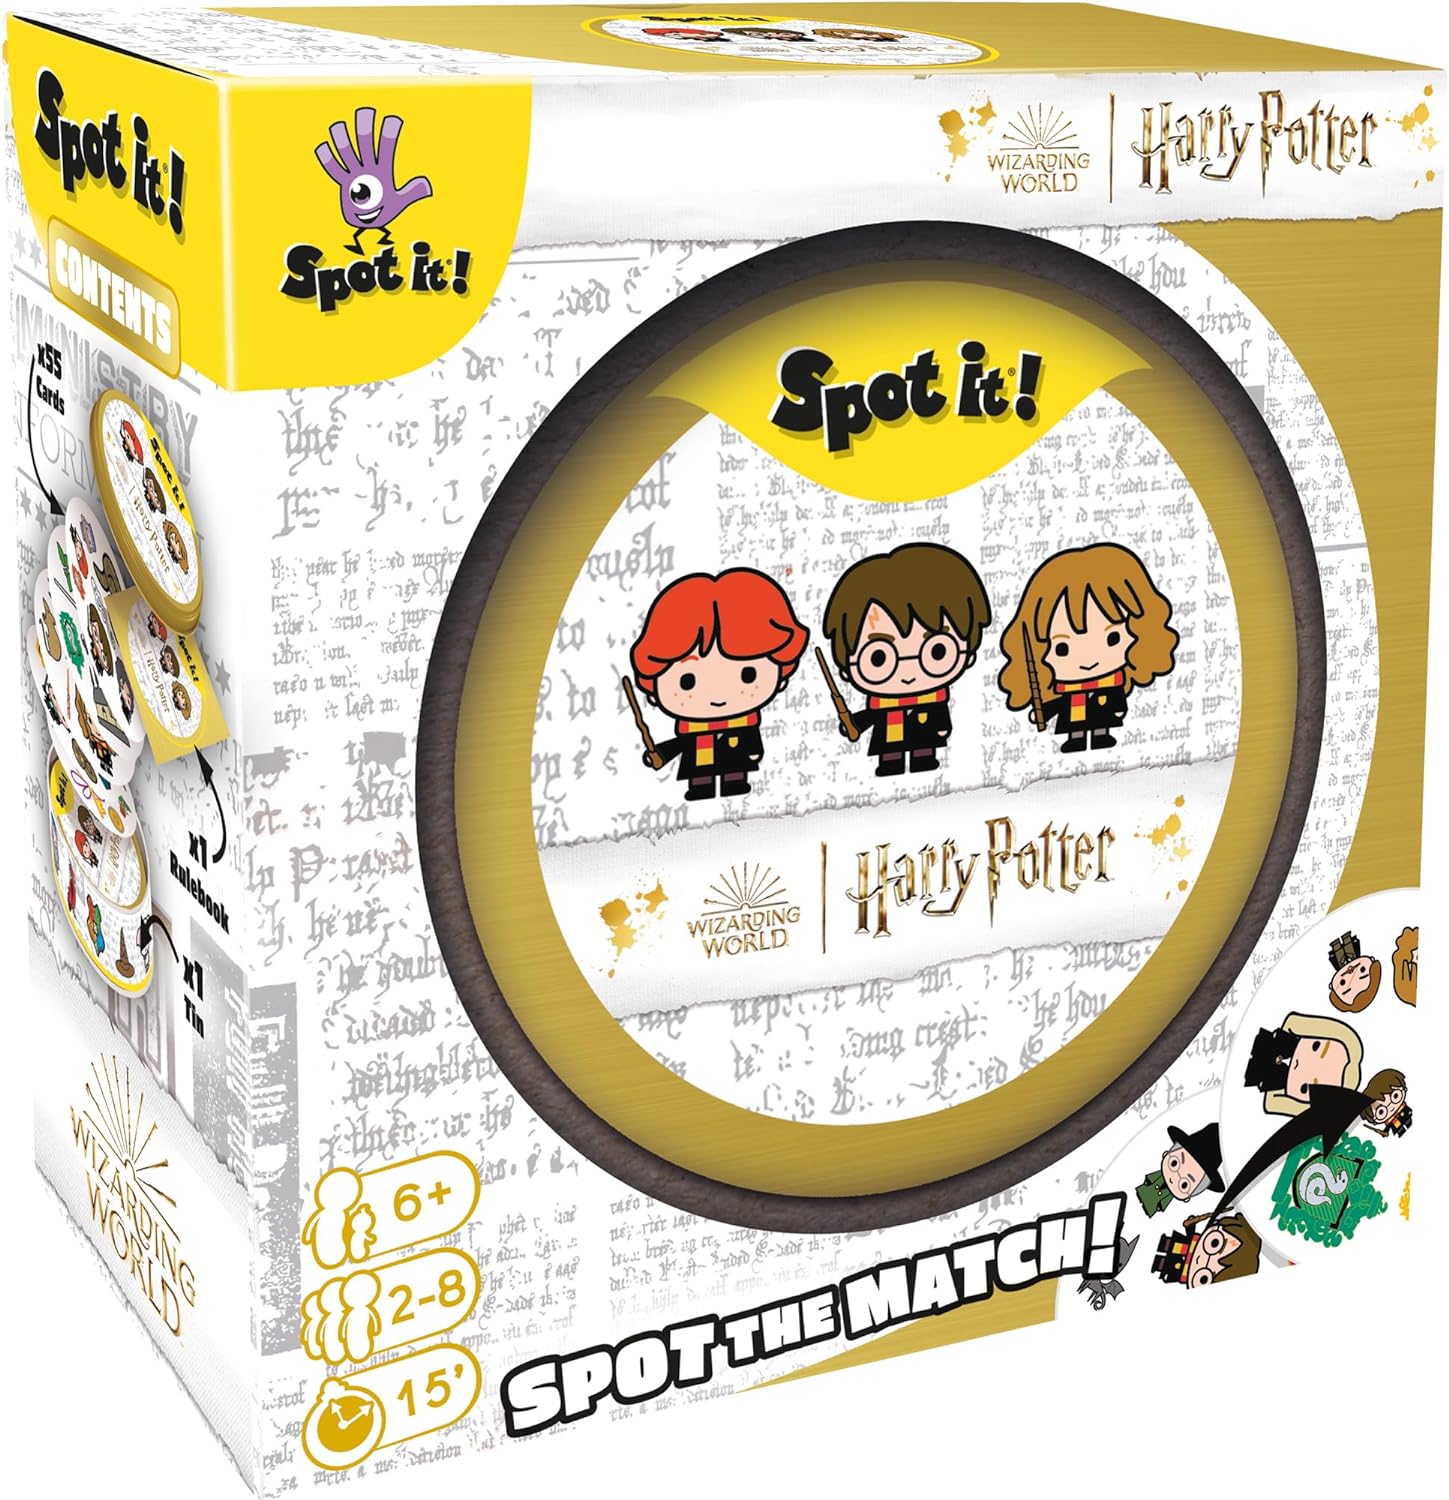 Zygomatic Spot It! Harry Potter (Eco-Blister) – Magical Wizarding World Card Game for Families! Fun Matching Game for Kids and Adults, Ages 6+, 2-8 Players, 15 Minute Playtime, Made